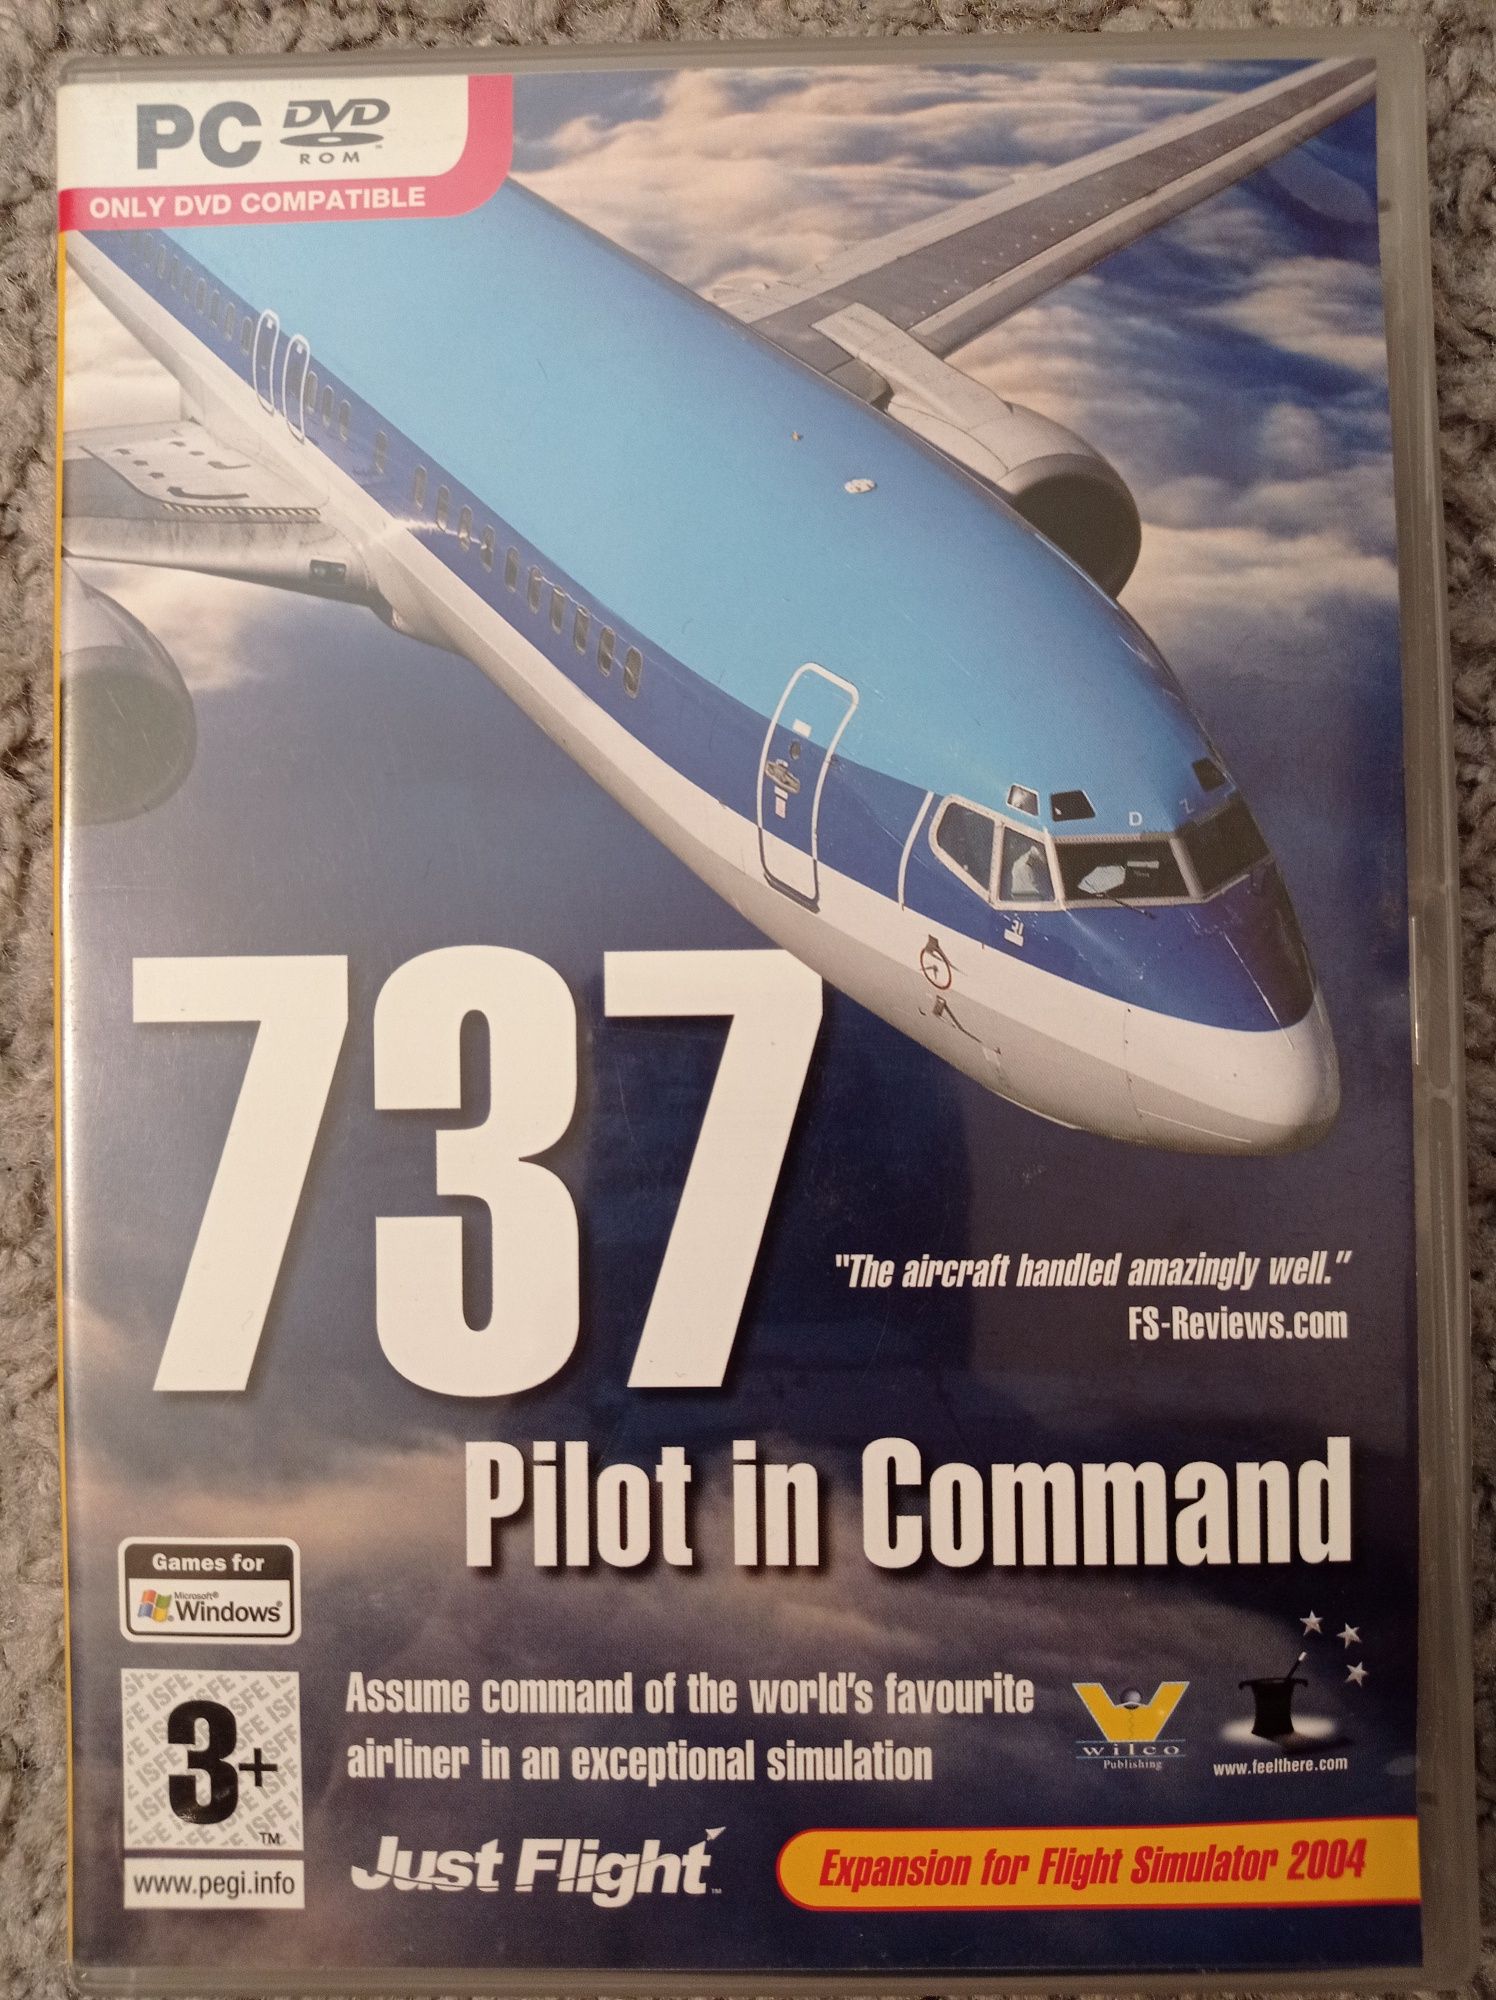 Pilot in Command 737 - Feel There, Wilco, Just Flight